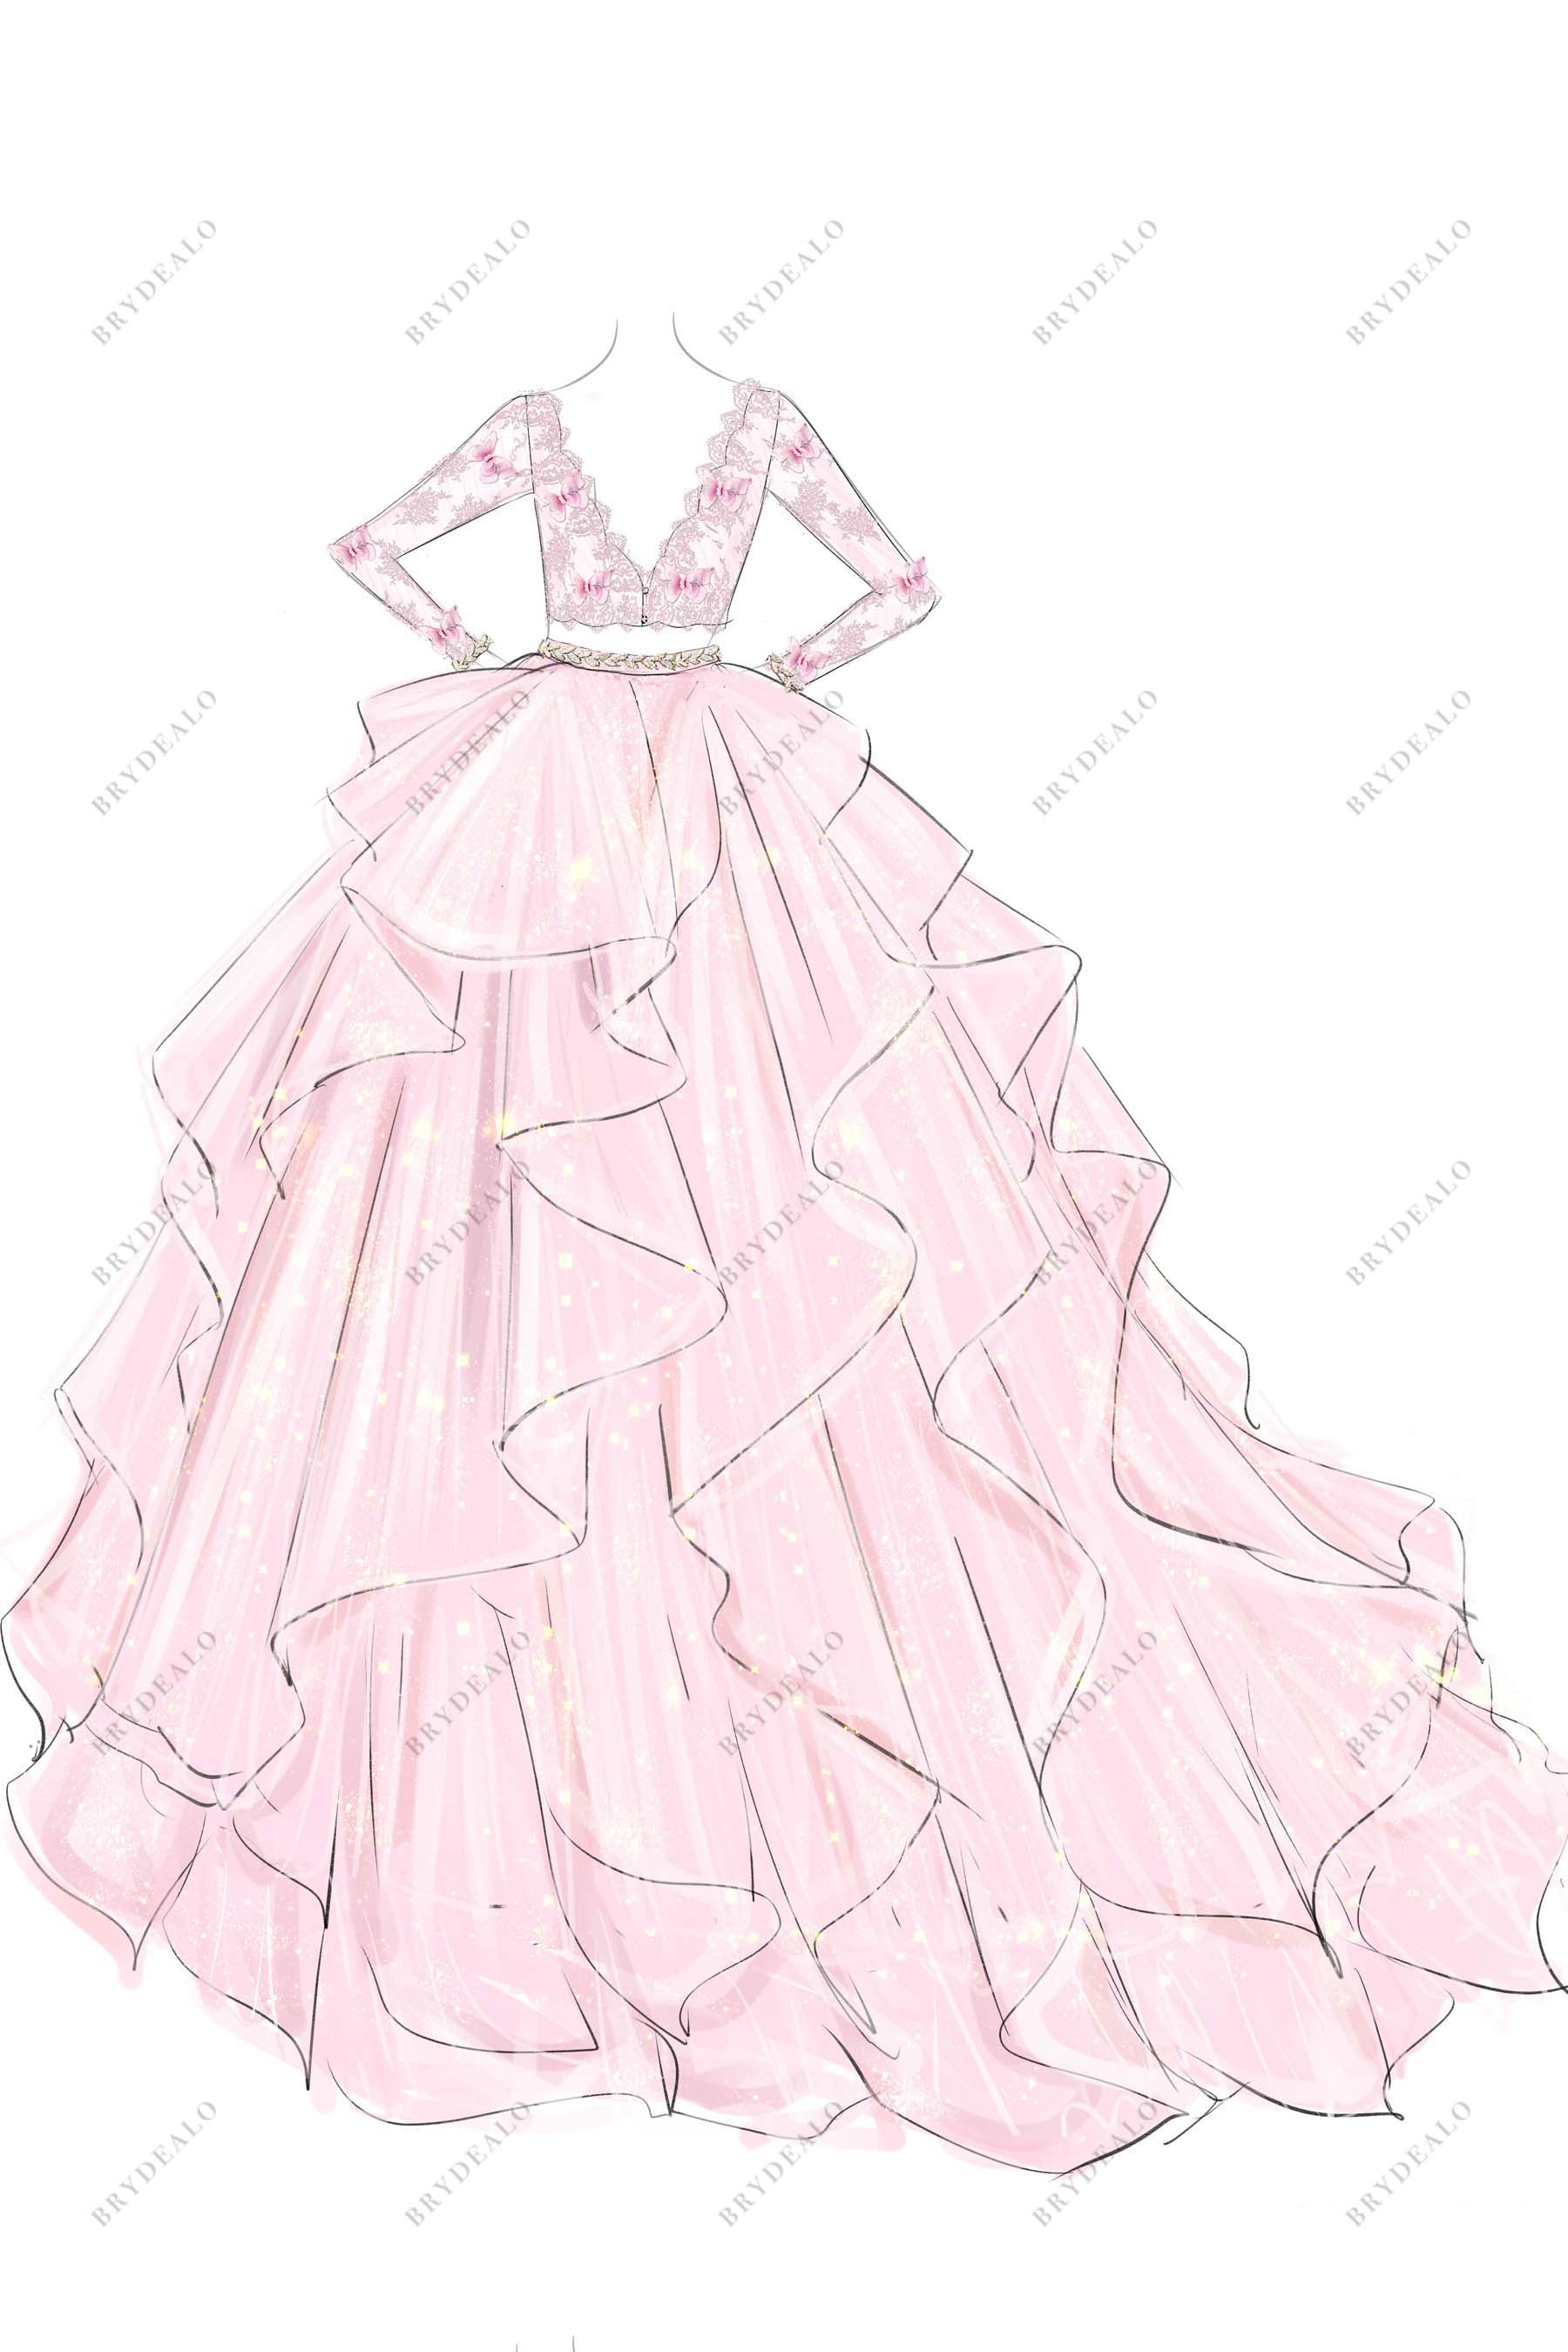 ruffled ball gown two-piece bridal dress sketch